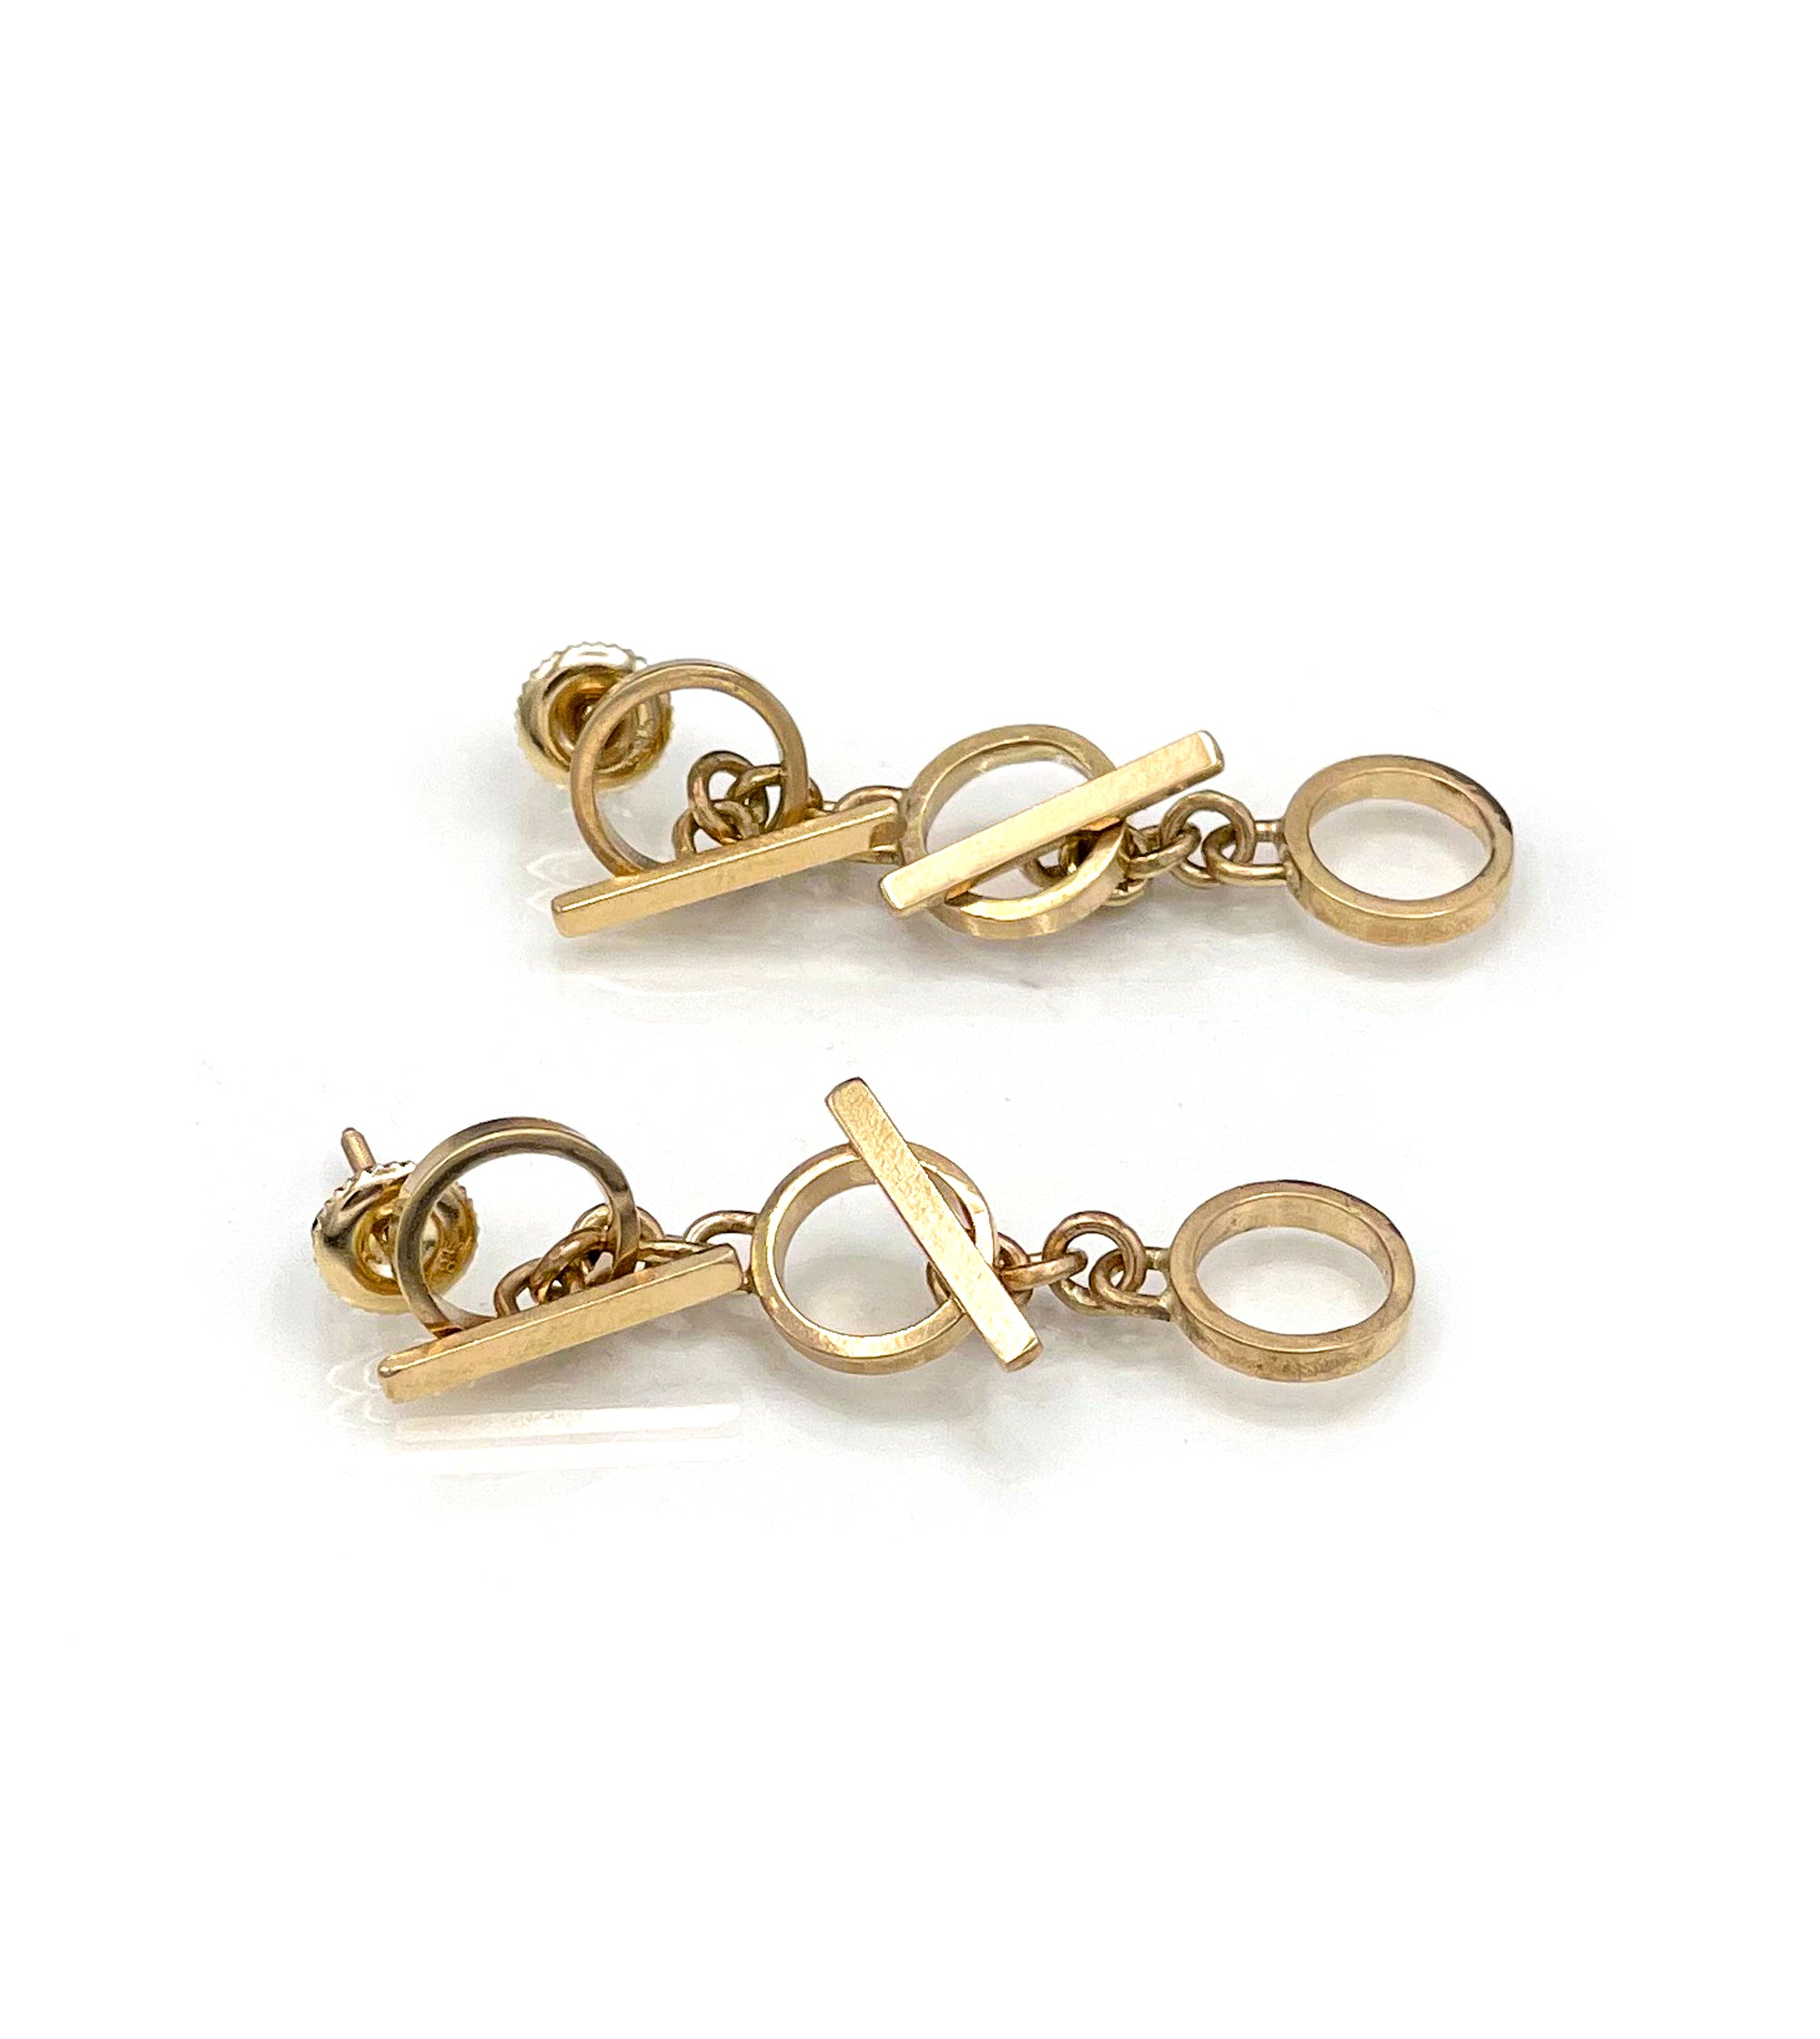 14K solid gold Toggle Build Your Own Pieces Jewelry, Toggle Earrings